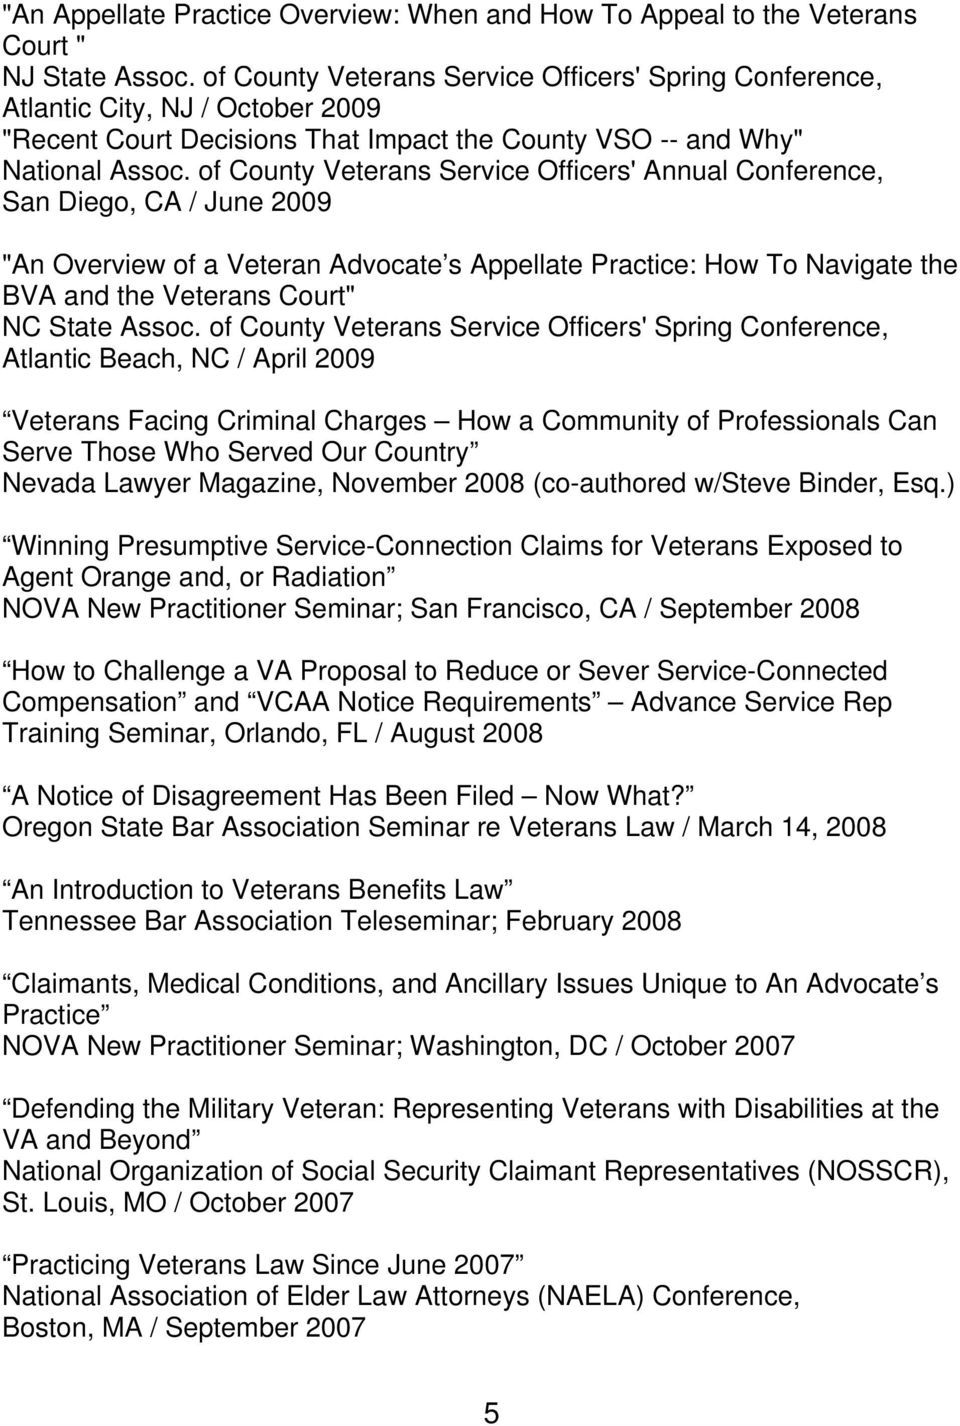 of County Veterans Service Officers' Annual Conference, San Diego, CA / June 2009 "An Overview of a Veteran Advocate s Appellate Practice: How To Navigate the BVA and the Veterans Court" NC State